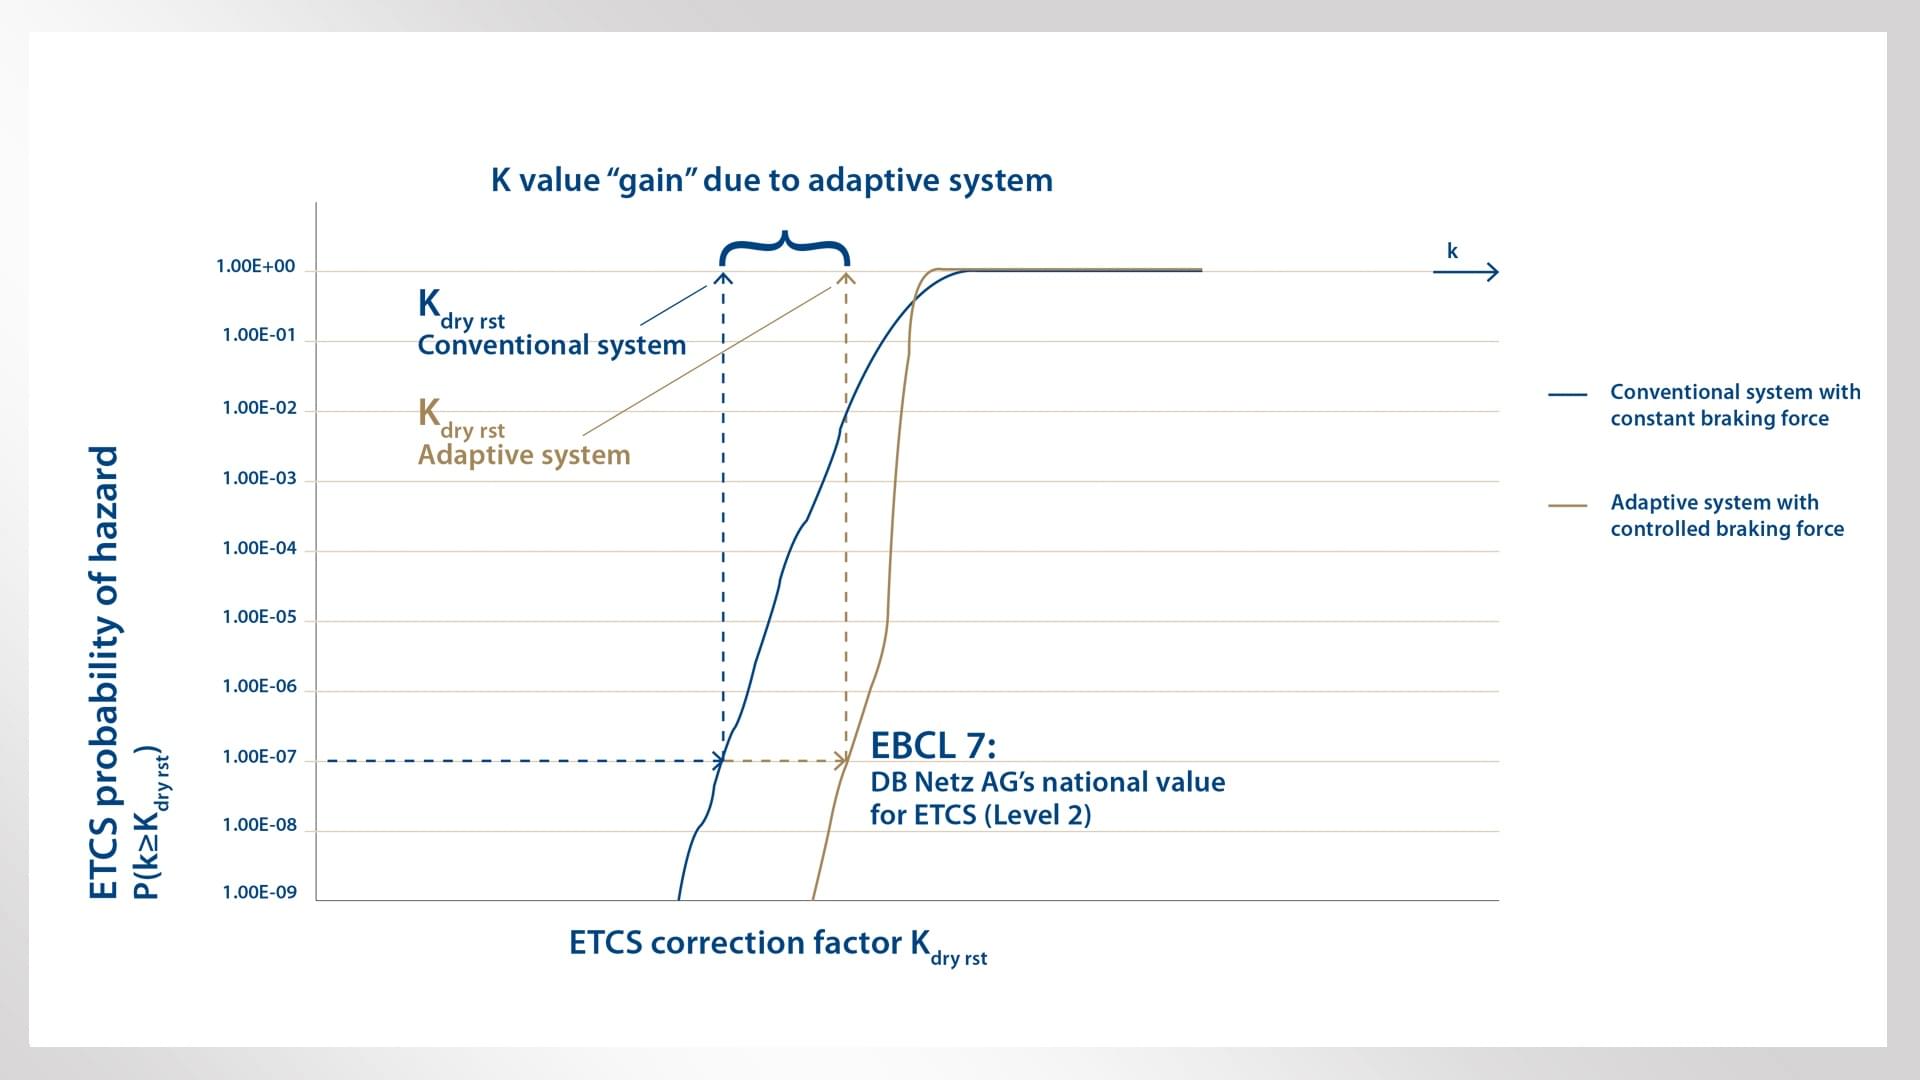 K value "gain" due to adaptive system